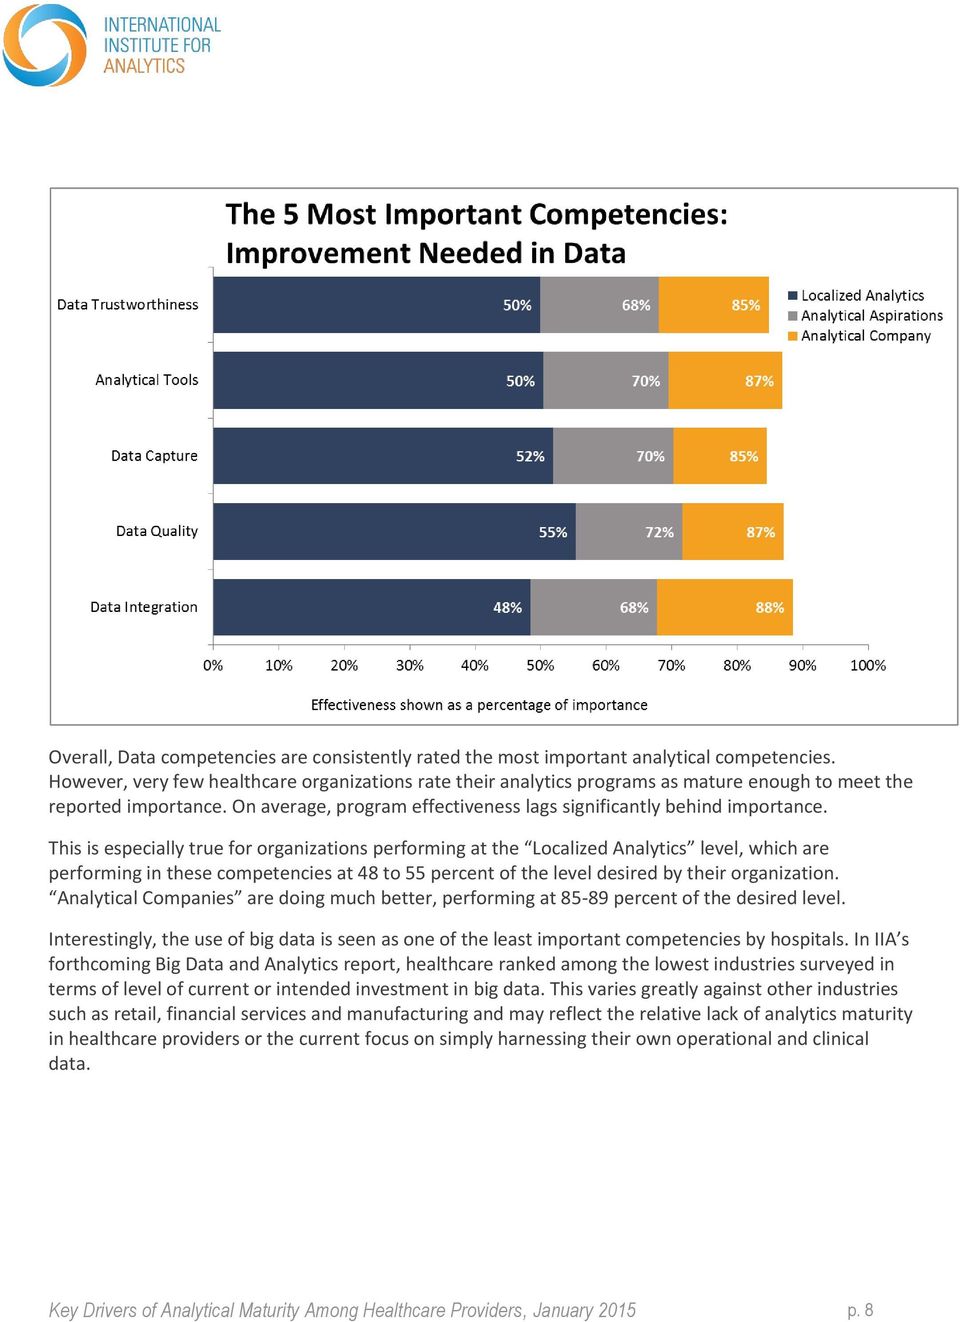 This is especially true for organizations performing at the Localized Analytics level, which are performing in these competencies at 48 to 55 percent of the level desired by their organization.